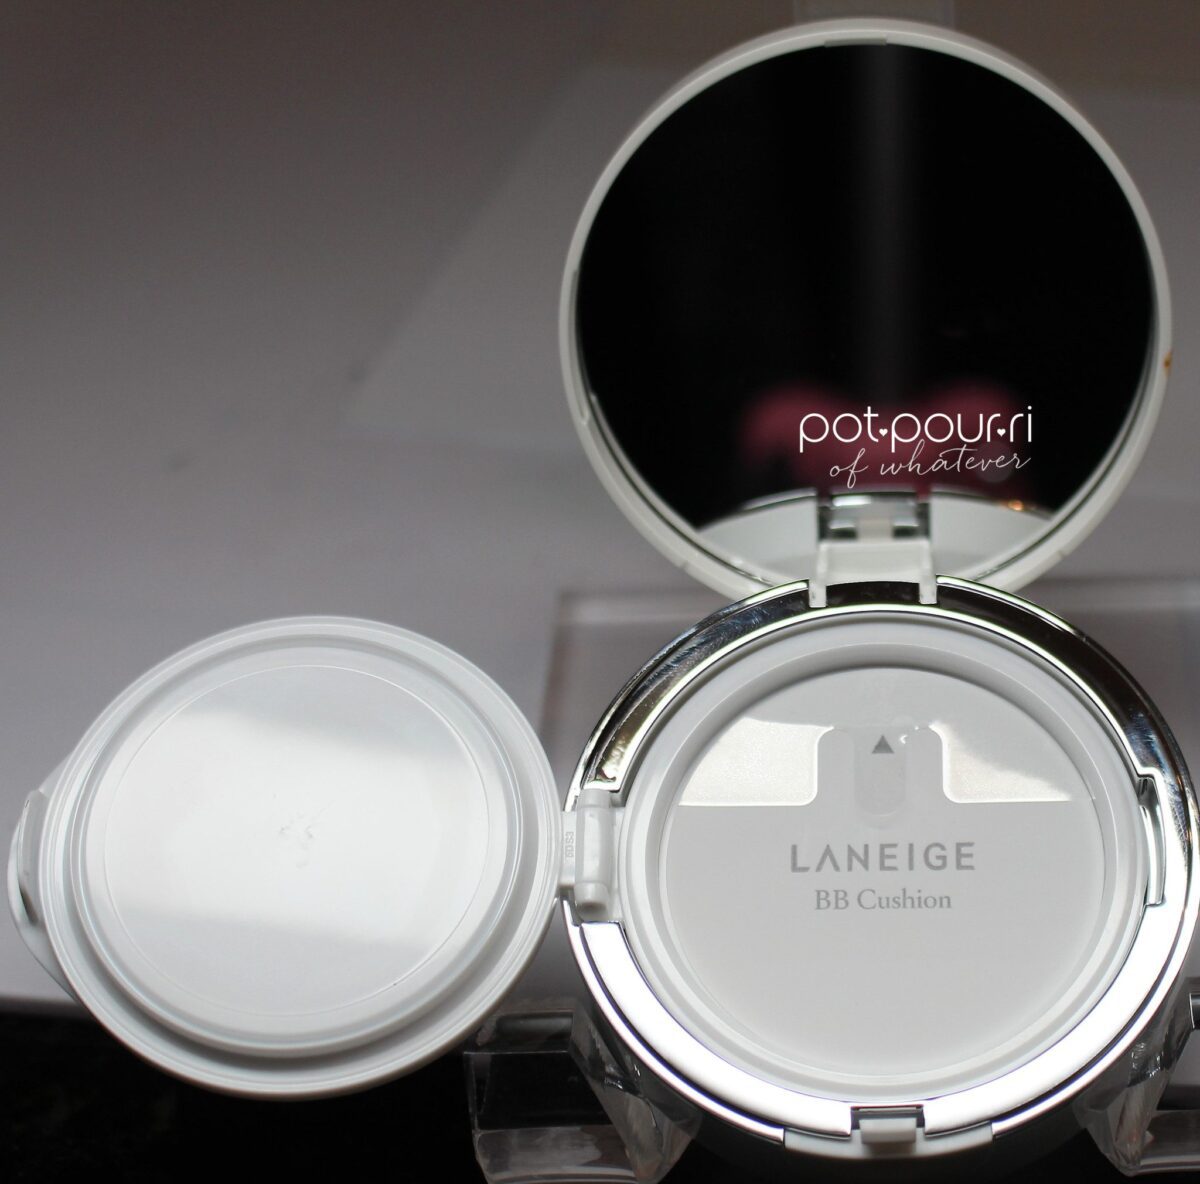 a mirror is included on the air cushion compact